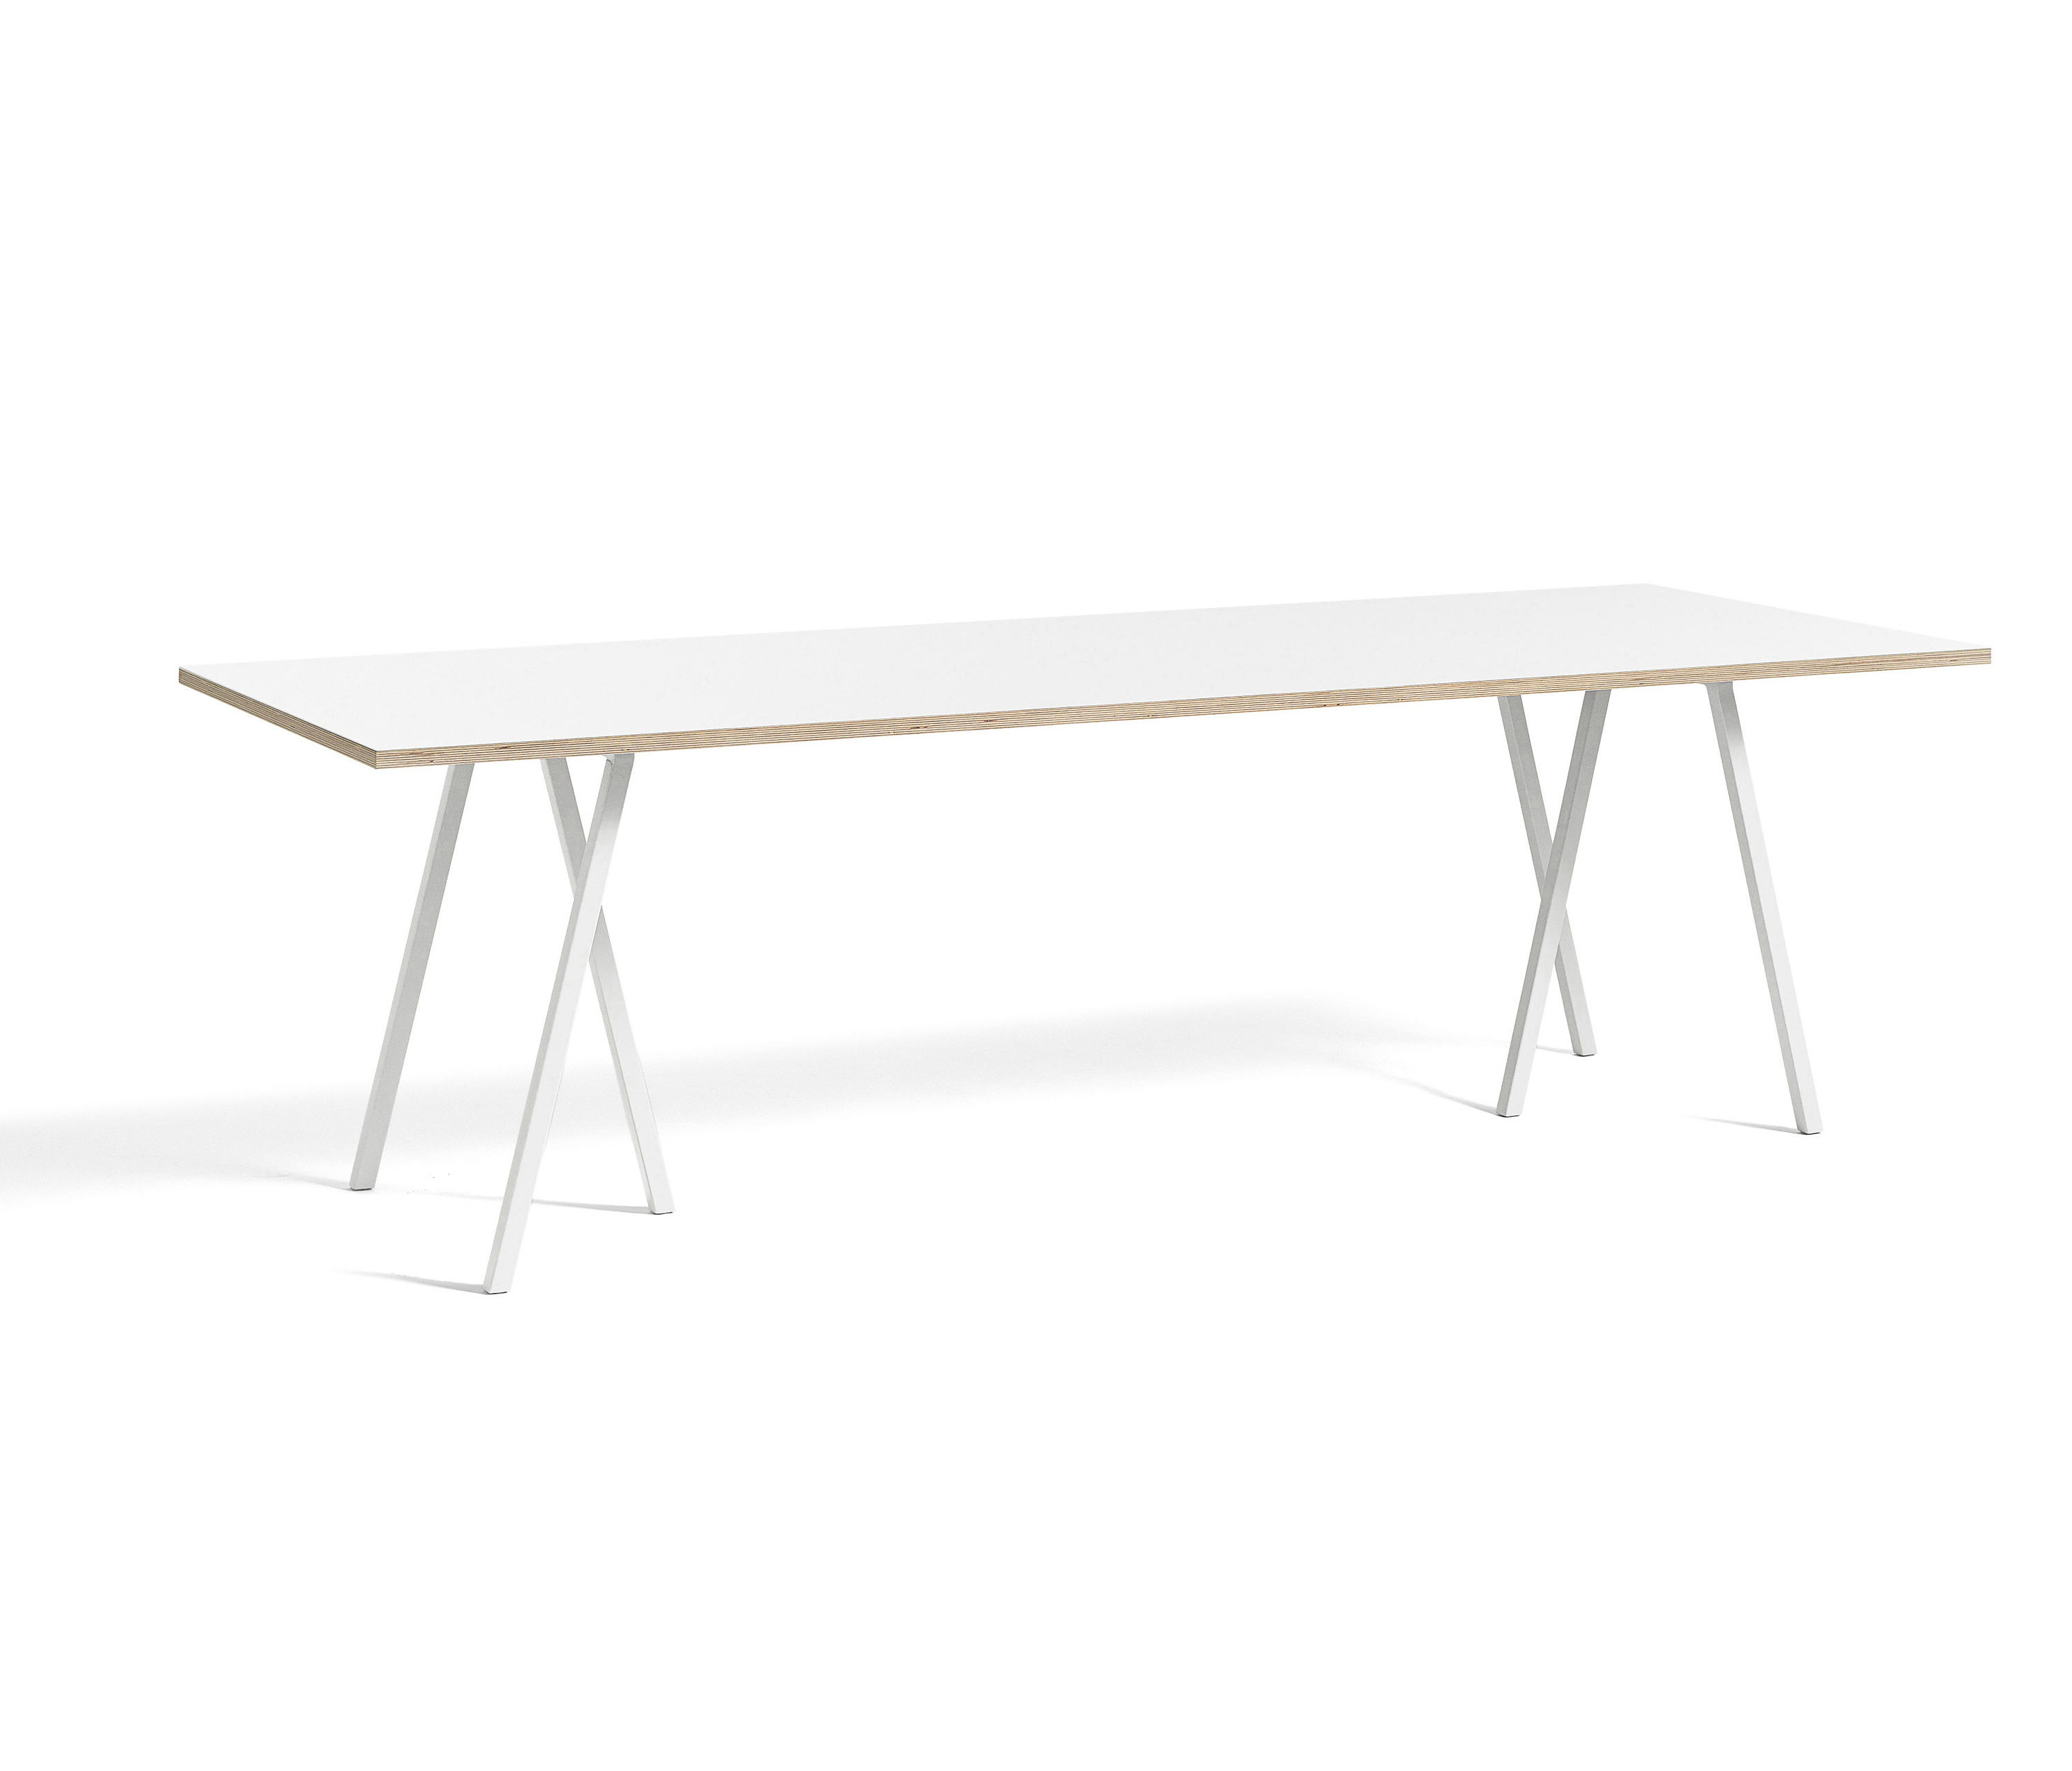 Loop Stand Table 250 designer furniture | Architonic